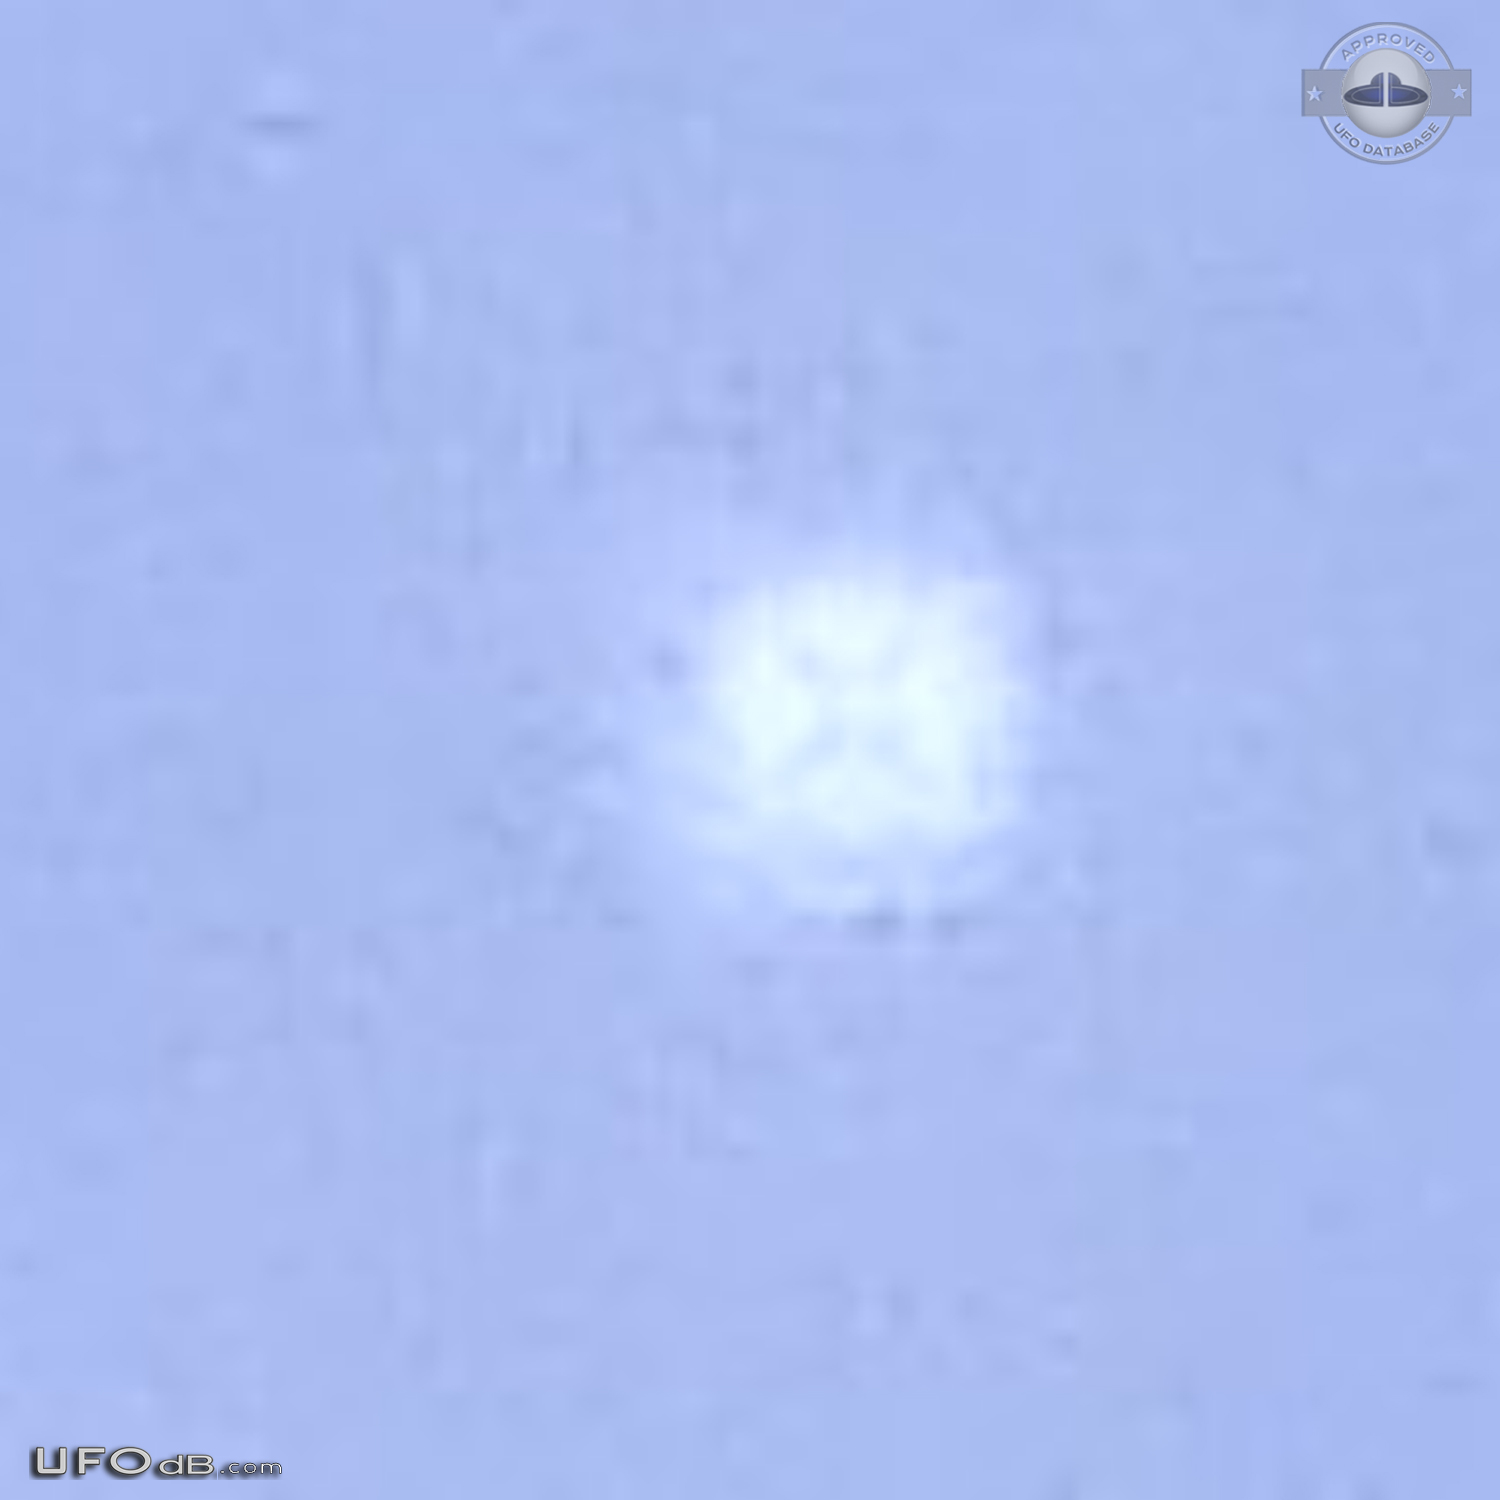 Star like ufo keeps hovering at one spot - Rotterdam Netherlands 2015 UFO Picture #726-2